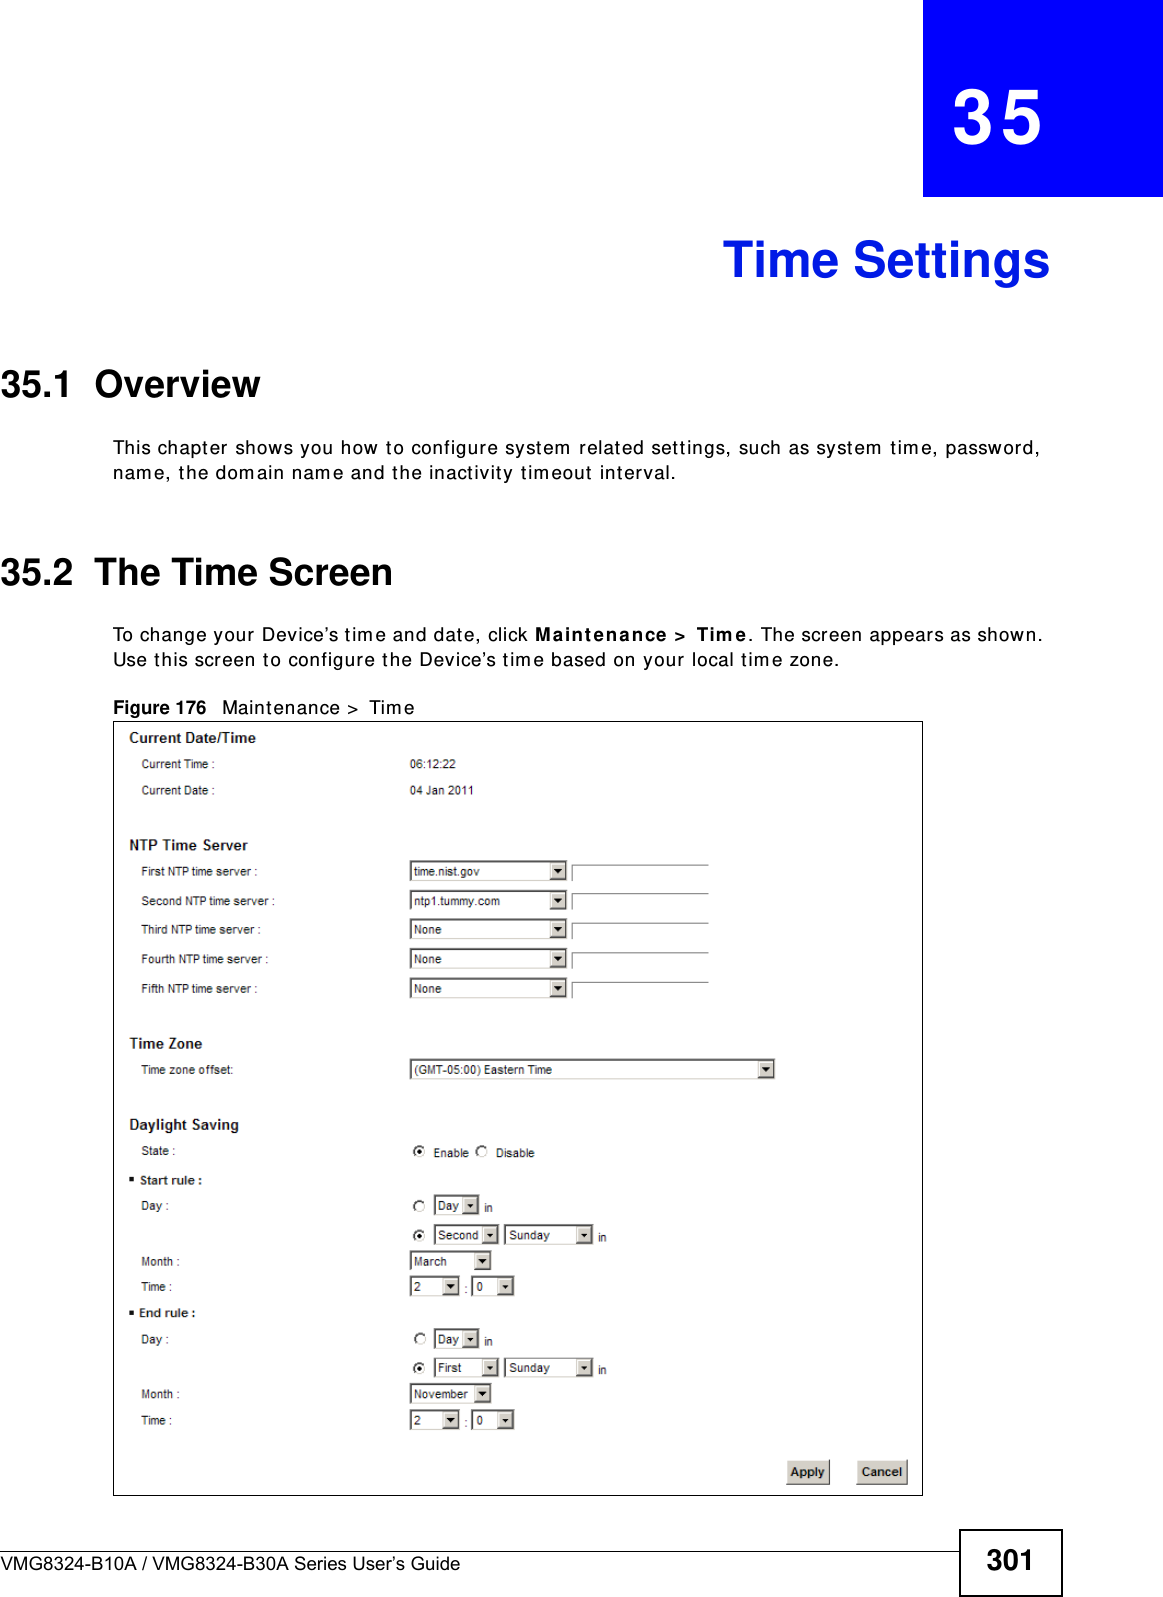 VMG8324-B10A / VMG8324-B30A Series User’s Guide 301CHAPTER   35Time Settings35.1  OverviewThis chapt er shows you how t o configure system  relat ed set tings, such as syst em  t im e, passwor d, name, the dom ain nam e and the inactivity tim eout interval.    35.2  The Time Screen To change your Device’s tim e and date, click M ainte nance &gt;  Tim e . The screen appears as shown. Use t his screen t o configure the Device’s t im e based on your local t im e zone.Figure 176   Maintenance &gt;  Tim e